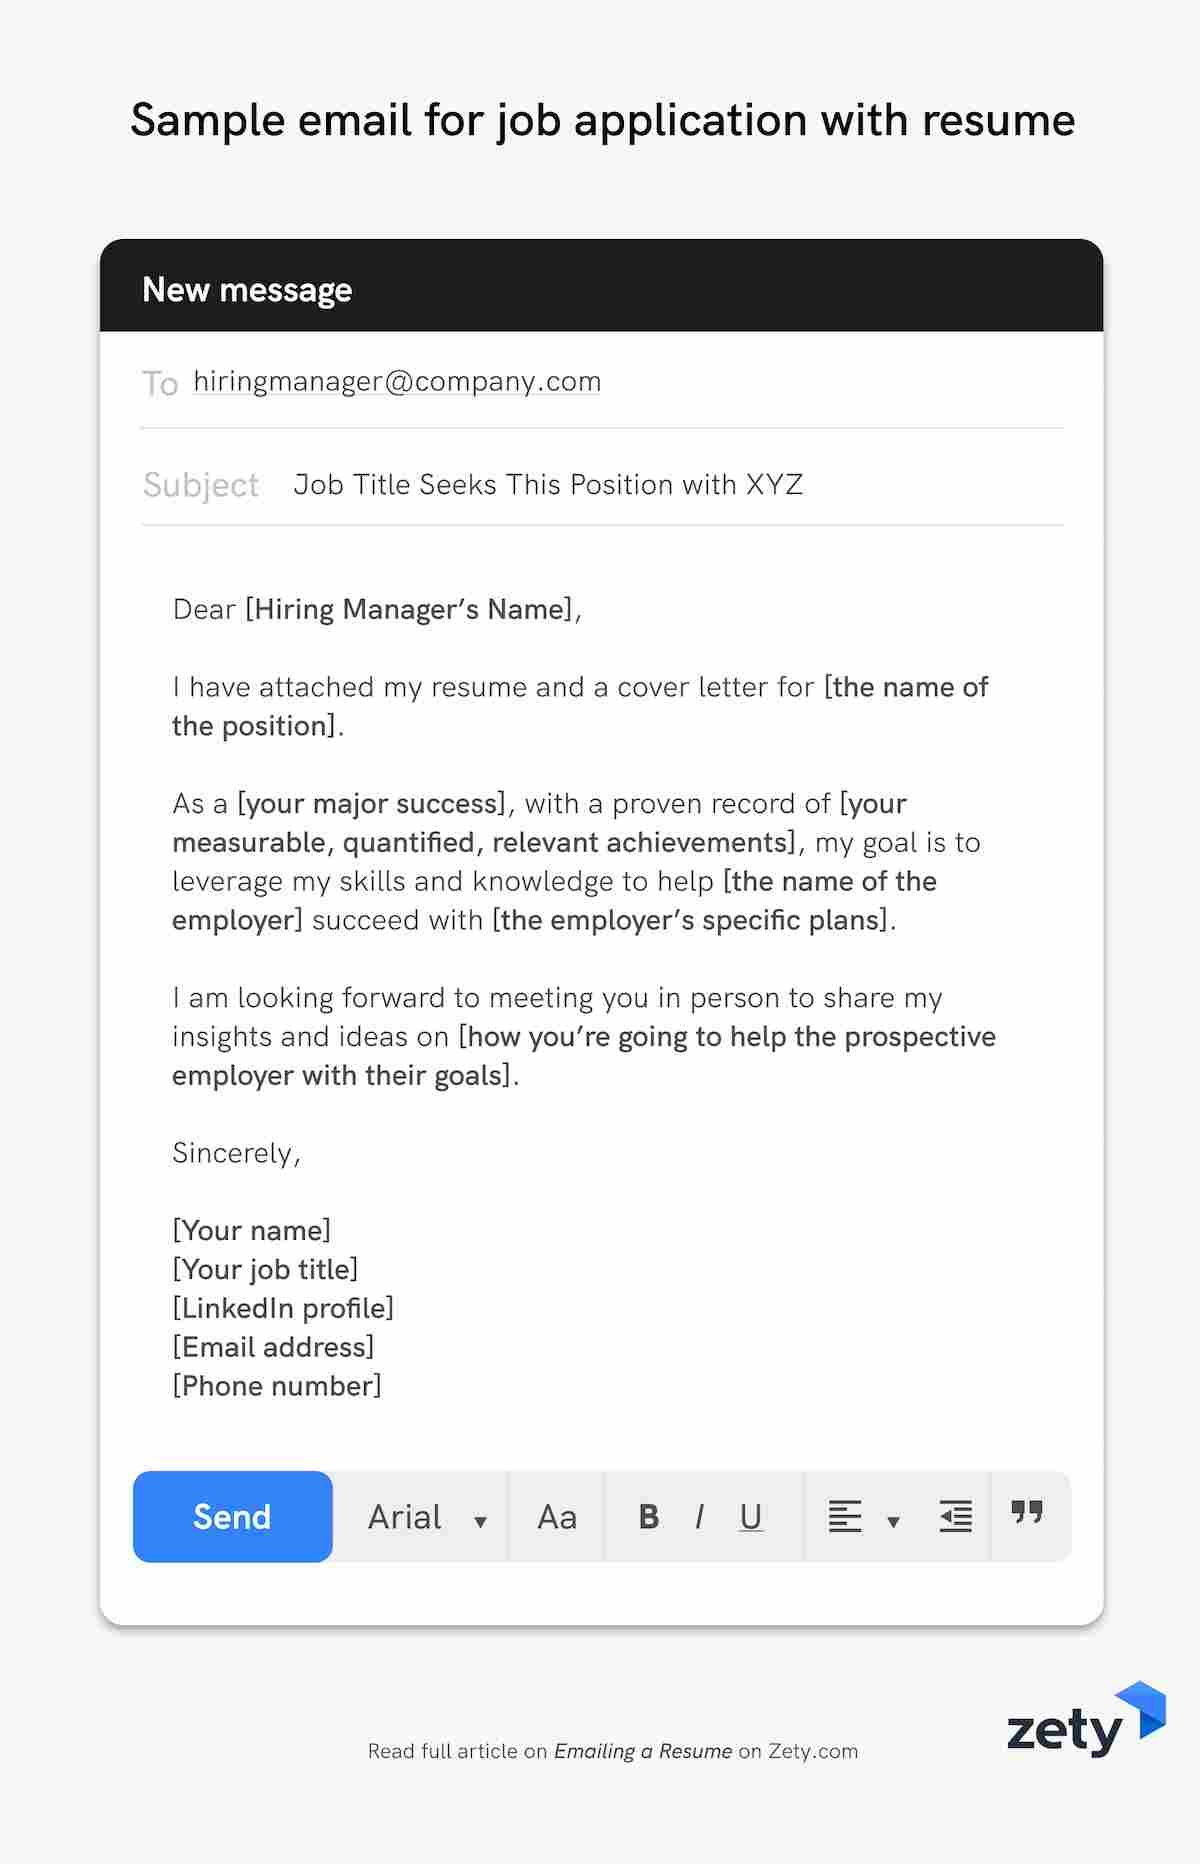 Email Linkedin Connection Sending Resume Sample How to Email A Resume to An Employer: 12lancarrezekiq Email Examples